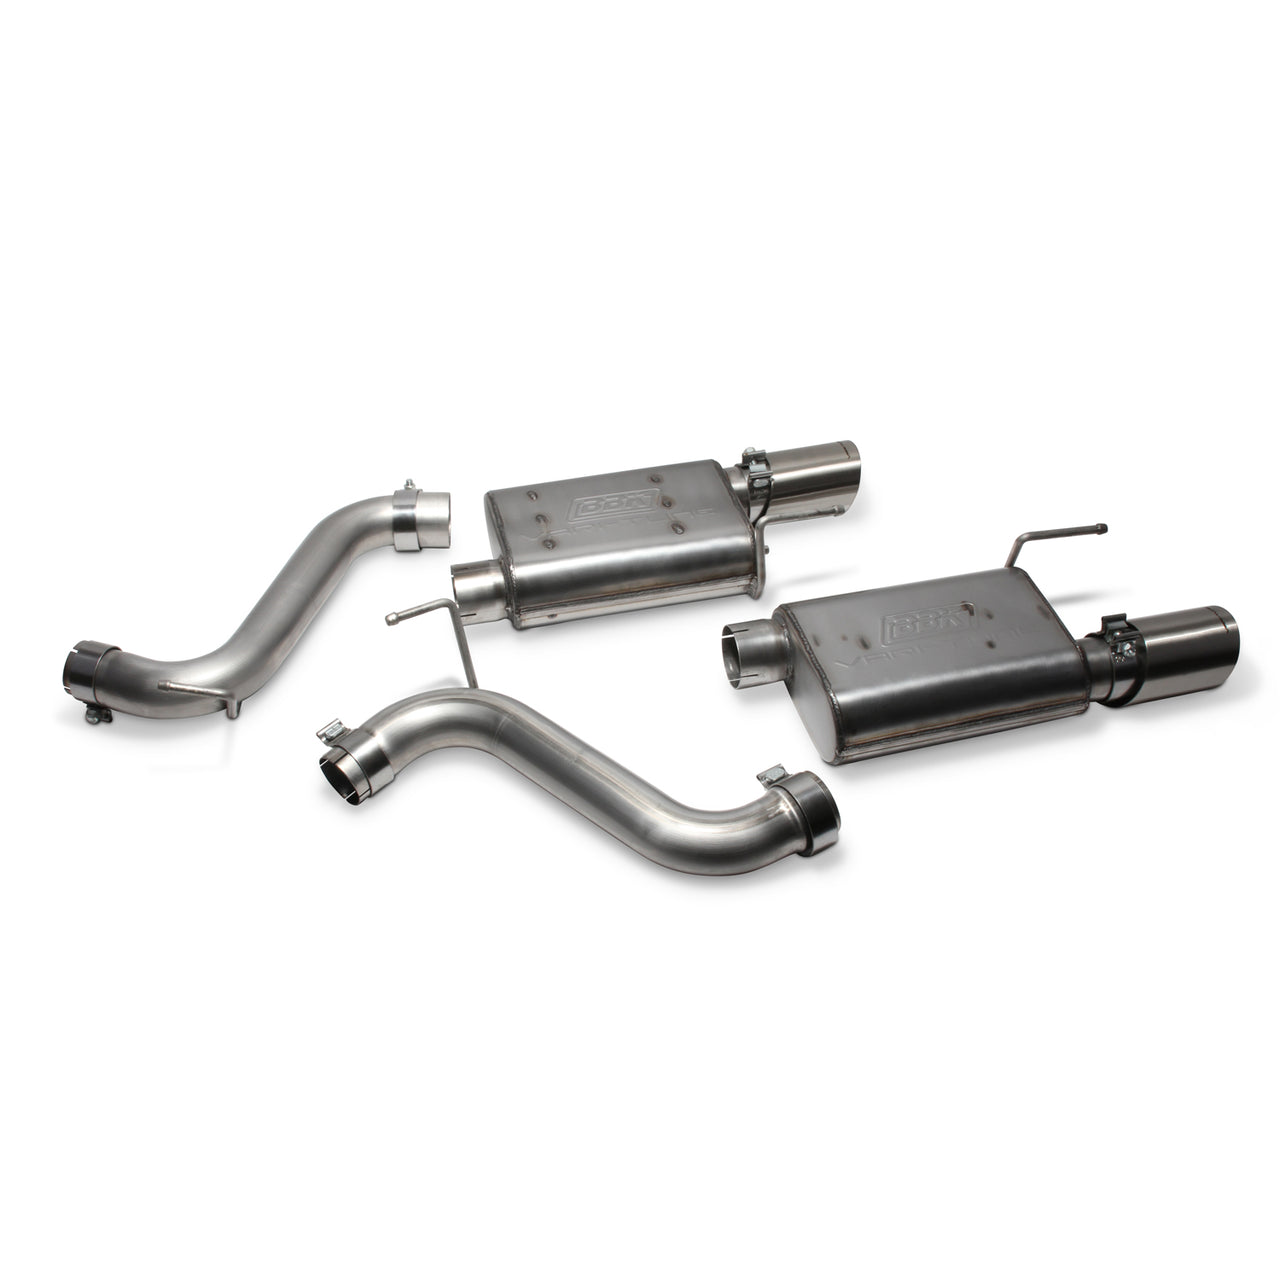 2015-2016 MUSTANG 5.0 GT VARITUNE AXLE BACK EXHAUST KIT COUPE ONLY